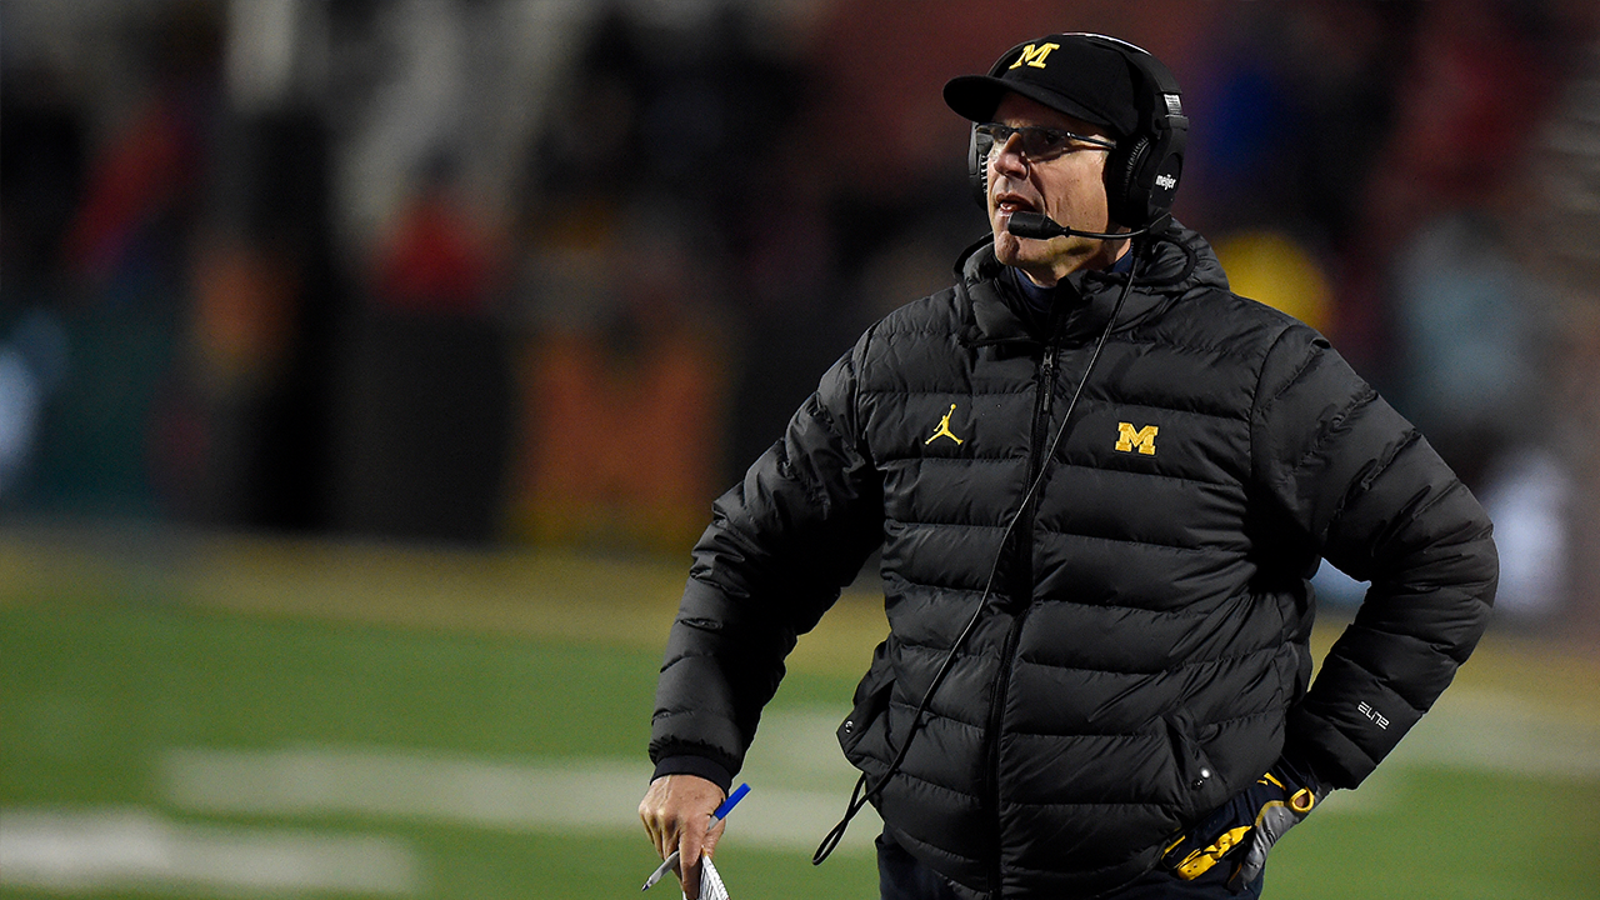 Does 'The Game' win change Jim Harbaugh's legacy?